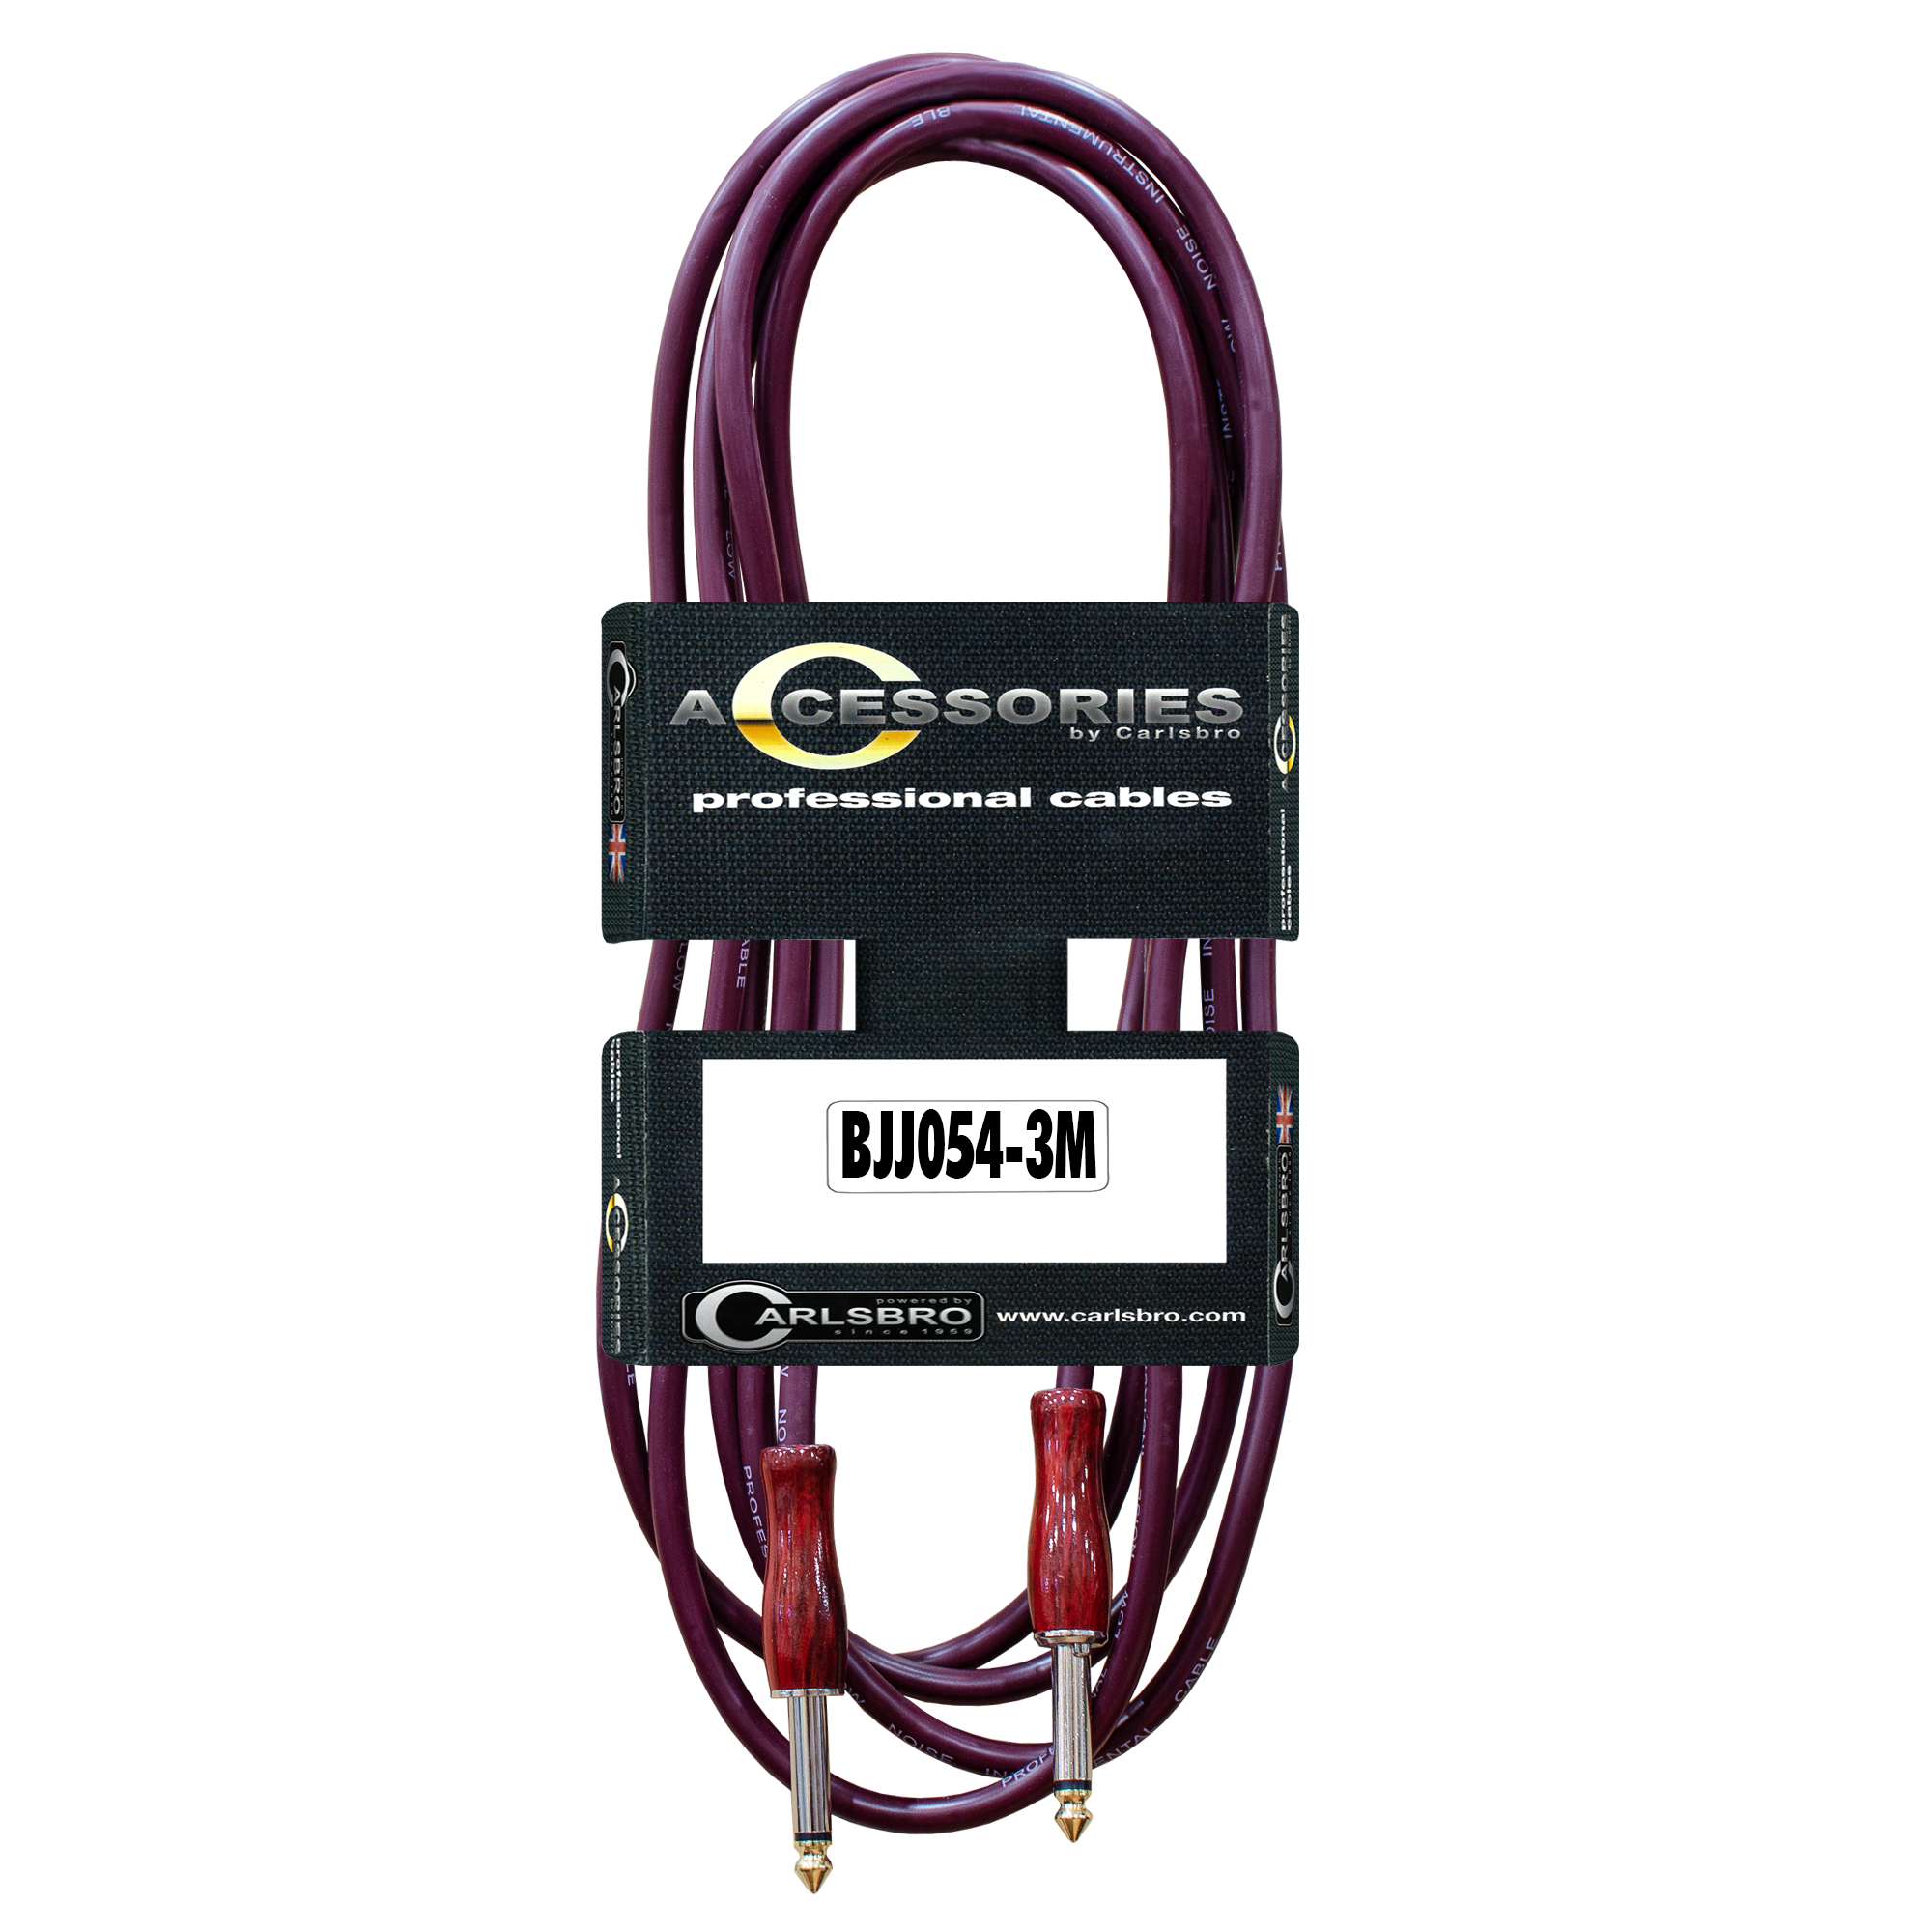 CARLSBRO BJJ054-3M Instrument Cable With Mute Function 3M